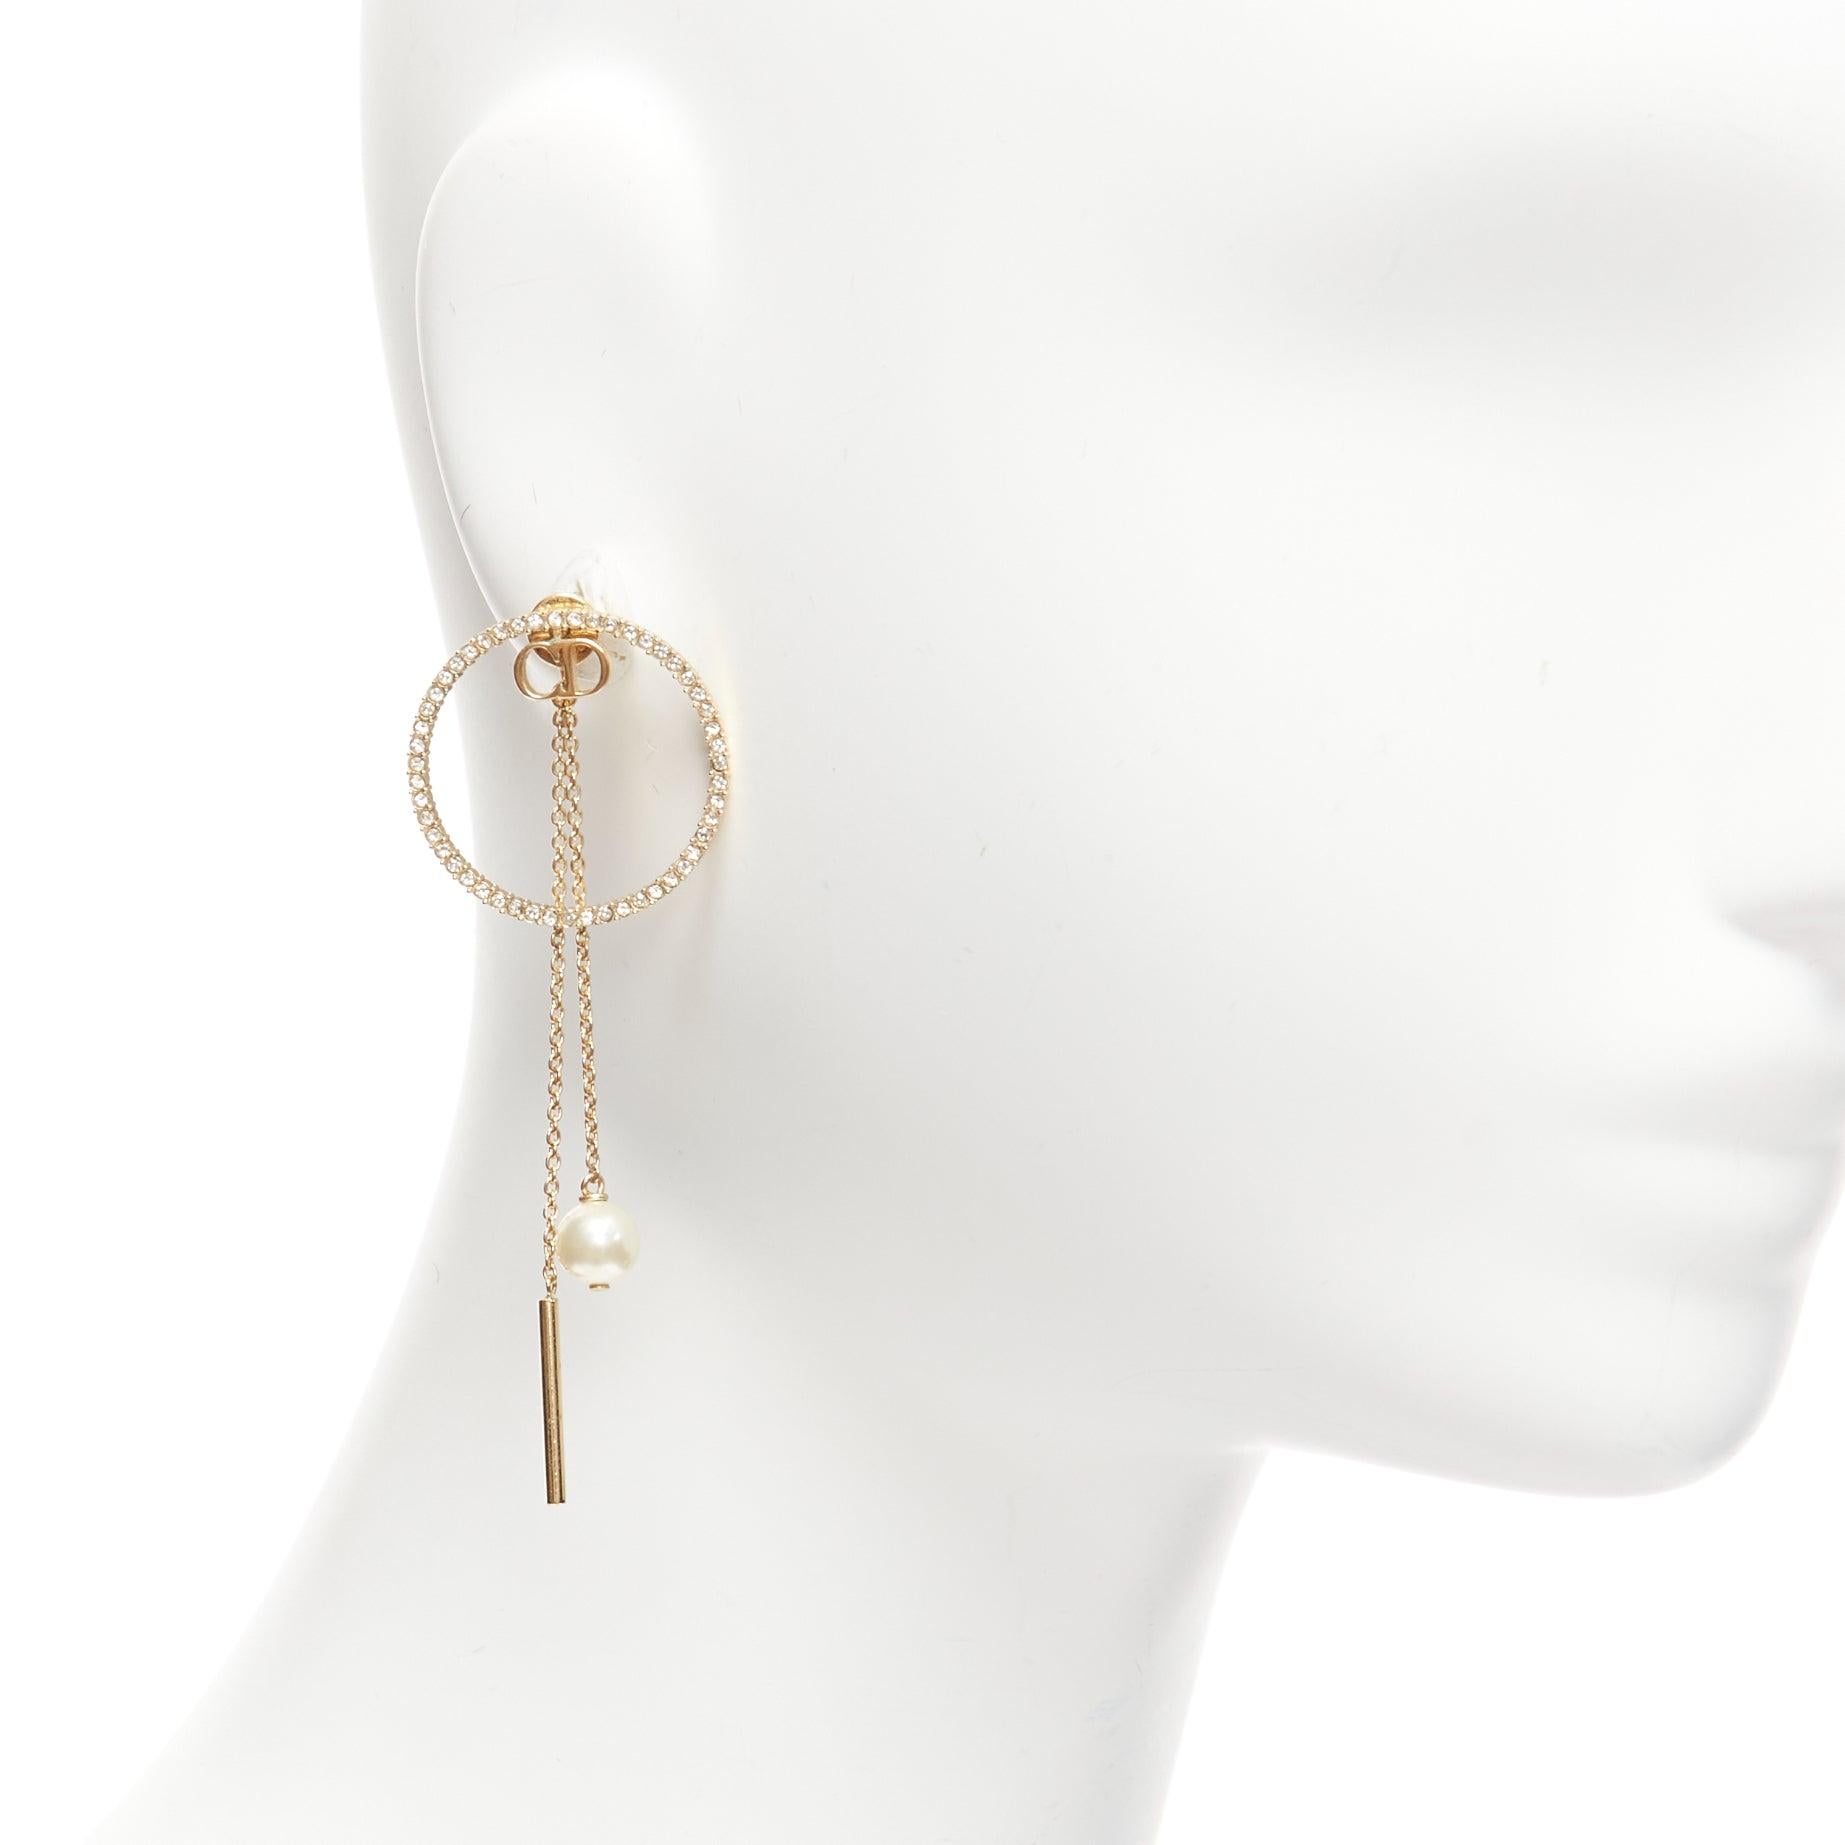 DIOR gold CD logo crystal pave hoop pearl pin drop stud earrings pair
Reference: AAWC/A00913
Brand: Dior
Designer: Maria Grazia Chiuri
Material: Metal, Faux Pearl
Color: Gold, Pearl
Pattern: Solid
Closure: Pin
Lining: Gold